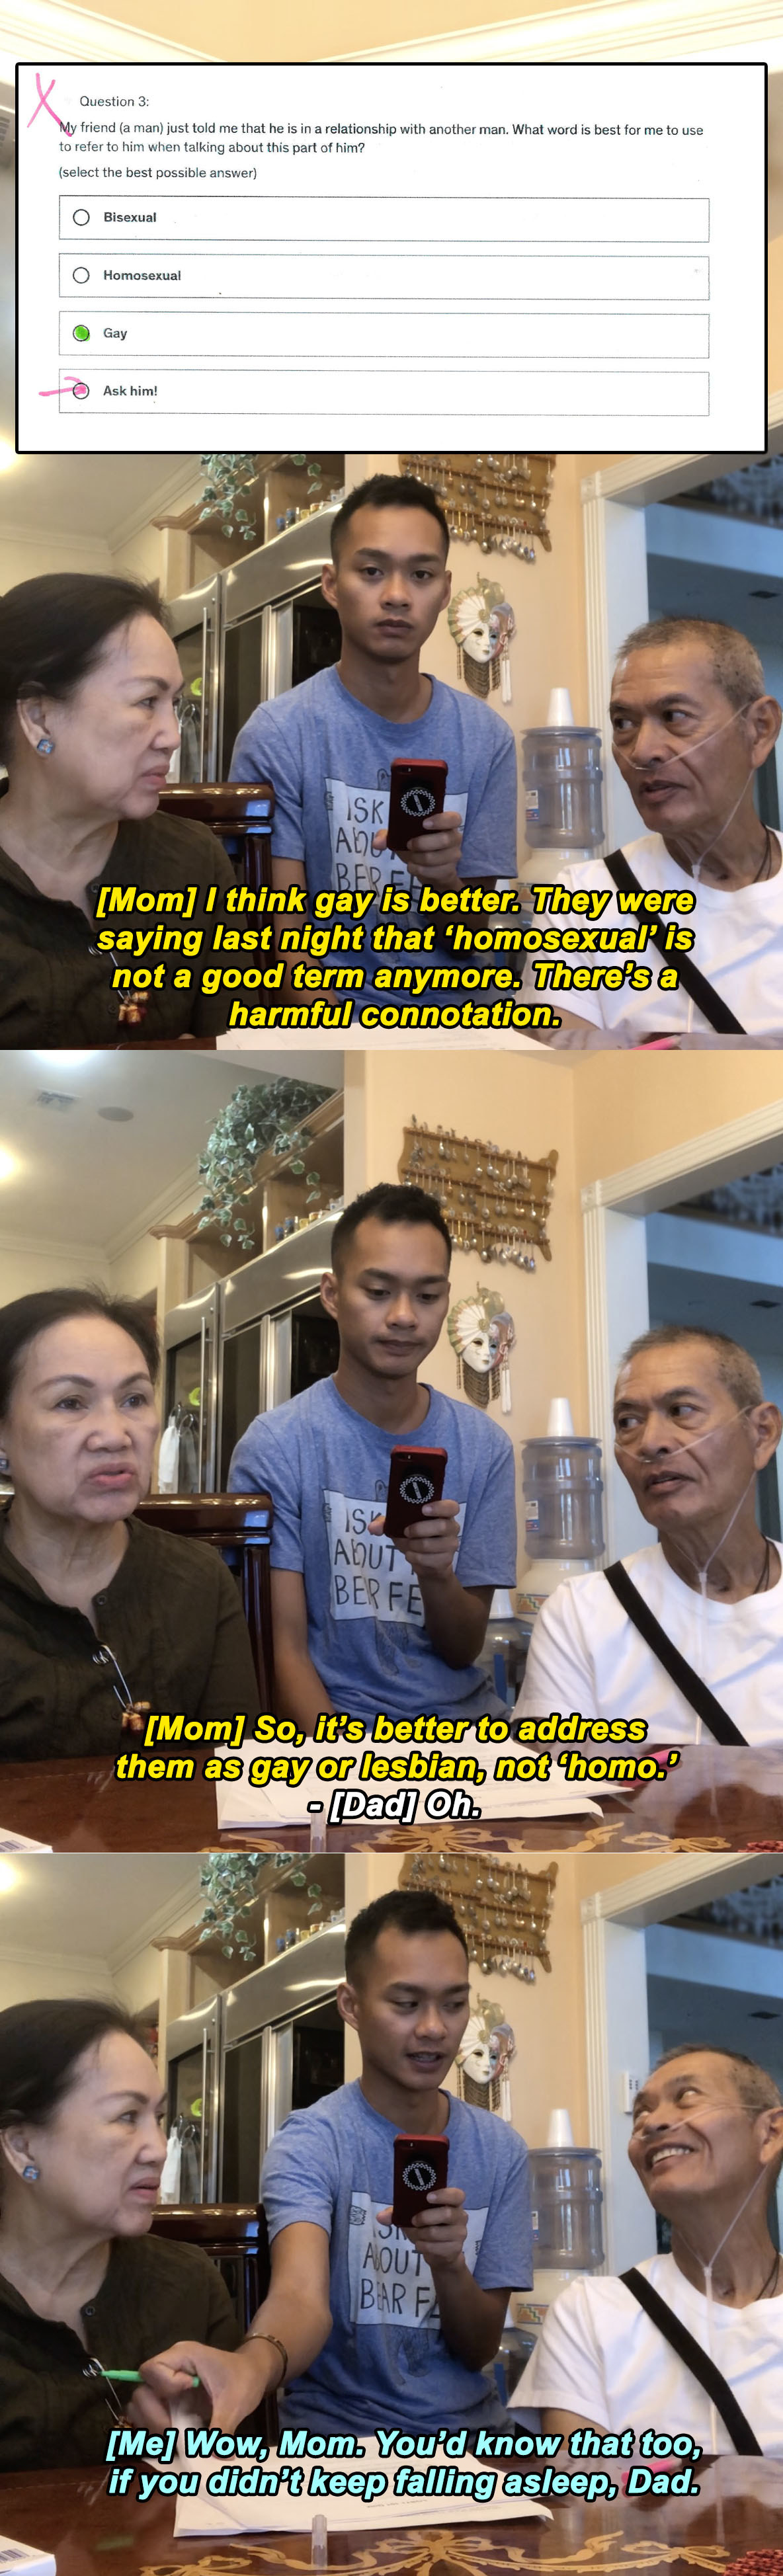 author watches as his parents discuss why &#x27;homosexual&#x27; is not a good term to use